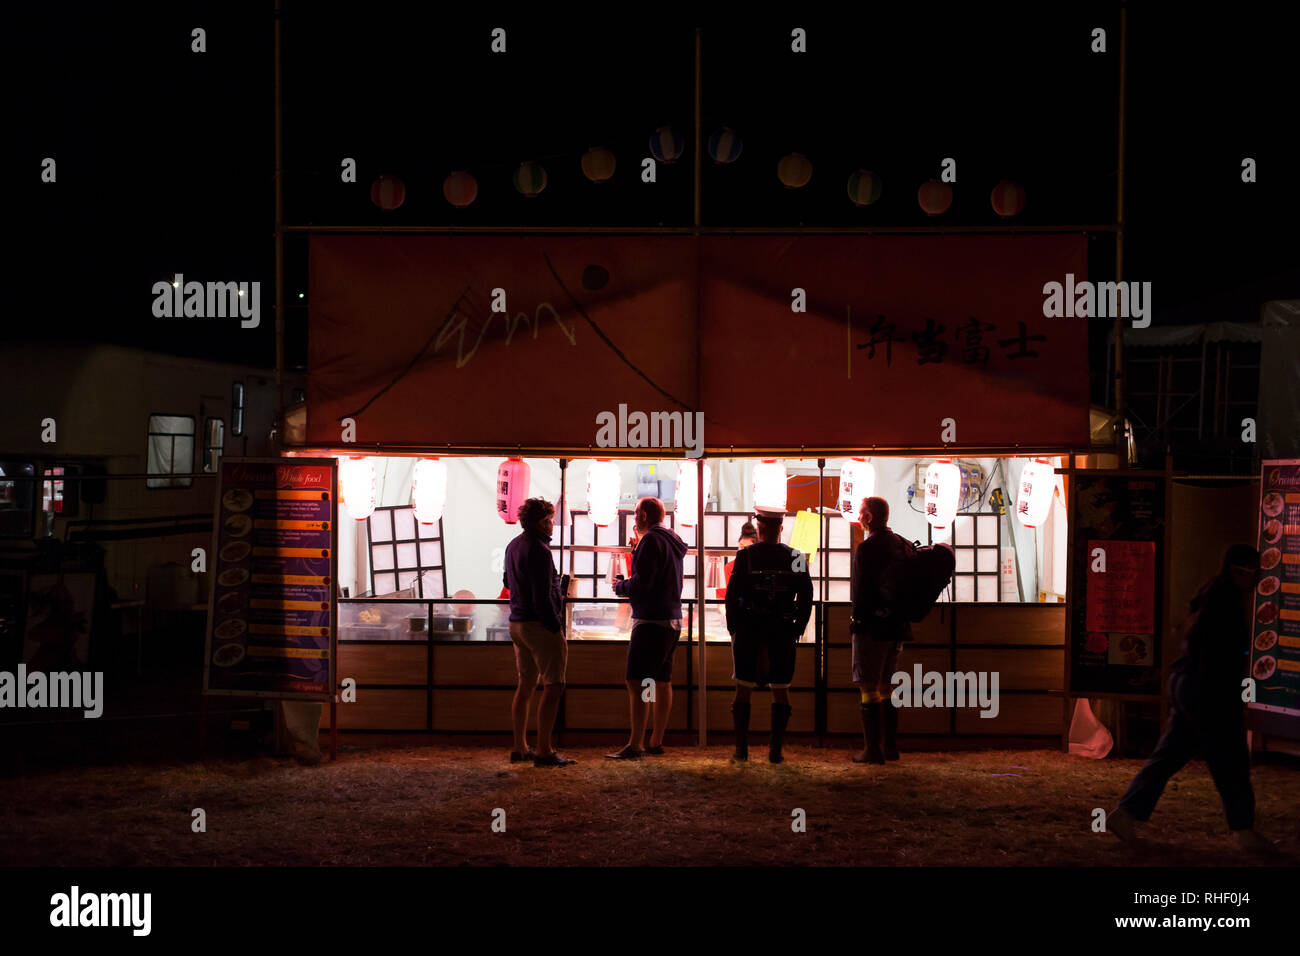 Four men wait for food outside a festival stall Stock Photo